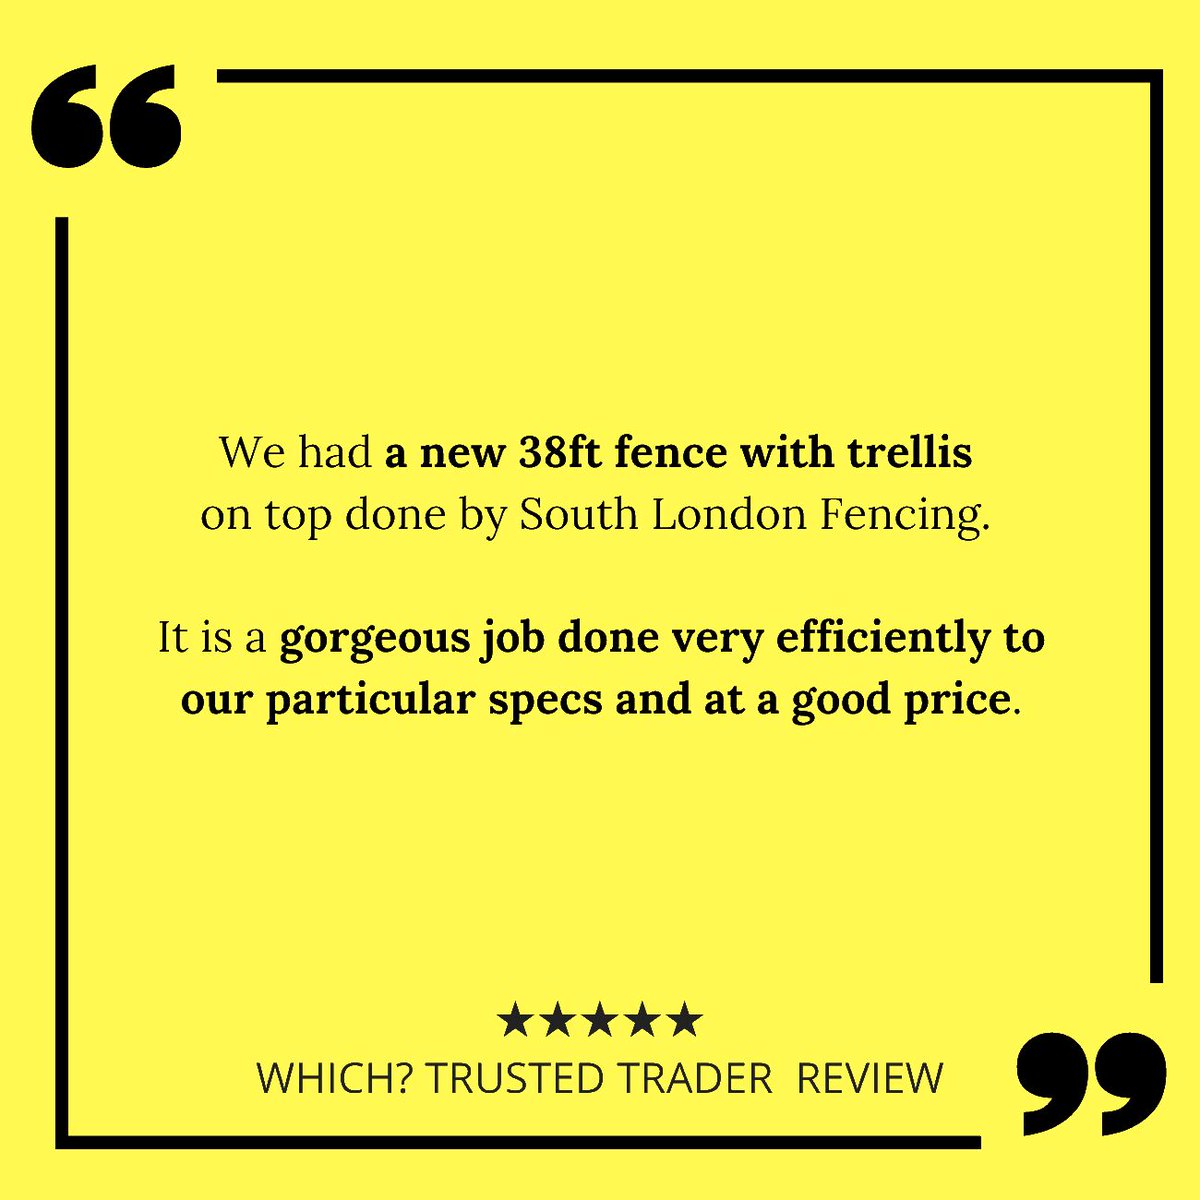 It's not the size that counts! 📐 

Our latest ⭐⭐⭐⭐⭐ customer review, left on Which? Trusted Trader😀

#fencingcontractor #fencingcontractors #domesticfencing  #purley #dulwich #foresthill #tooting #wimbledon #whichtrustedtrader #fivestarreview #happycustomer #customerreview